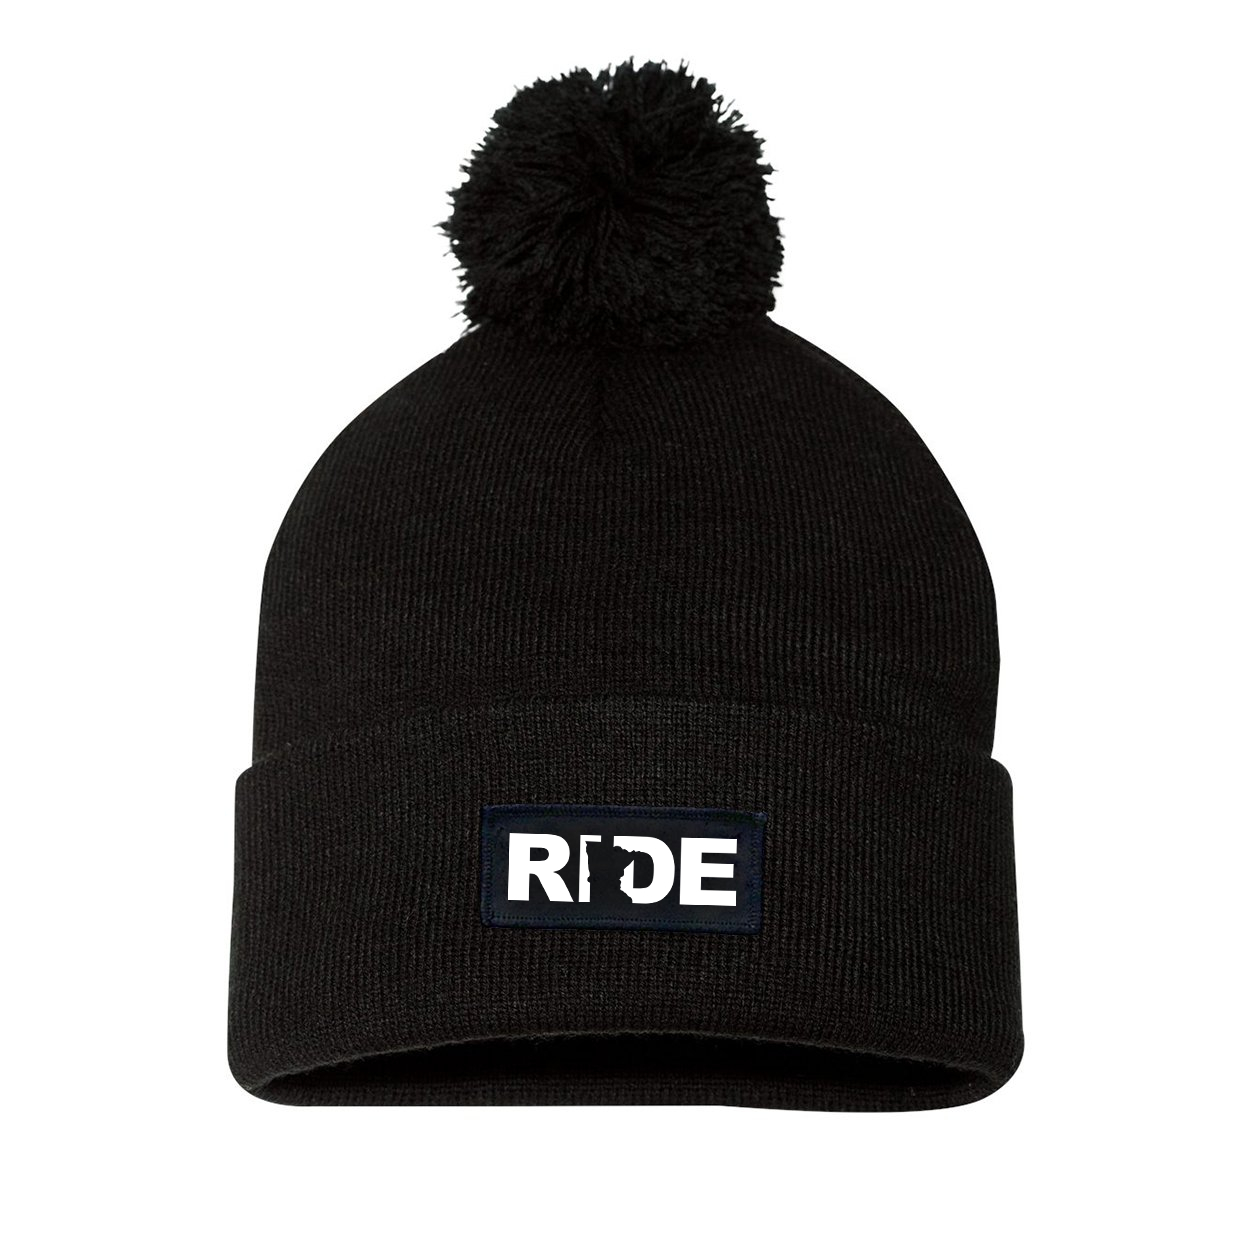 Ride Minnesota Night Out Woven Patch Roll Up Pom Knit Beanie Black (White Logo)